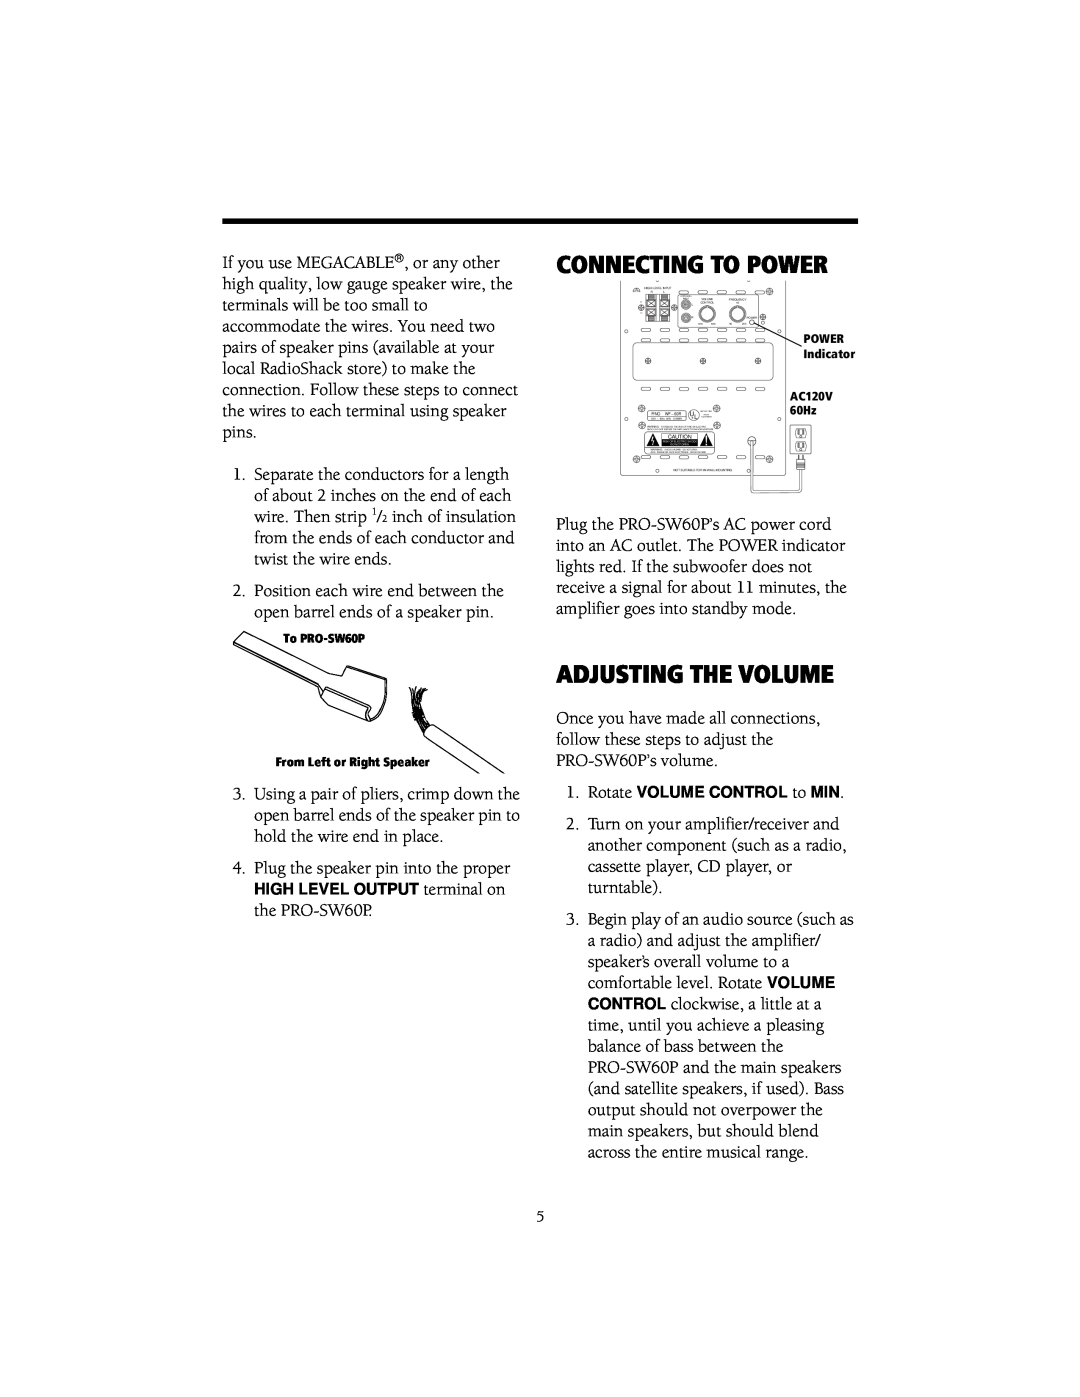 Samsung PRO-SW60P manual Connecting To Power, Adjusting The Volume 